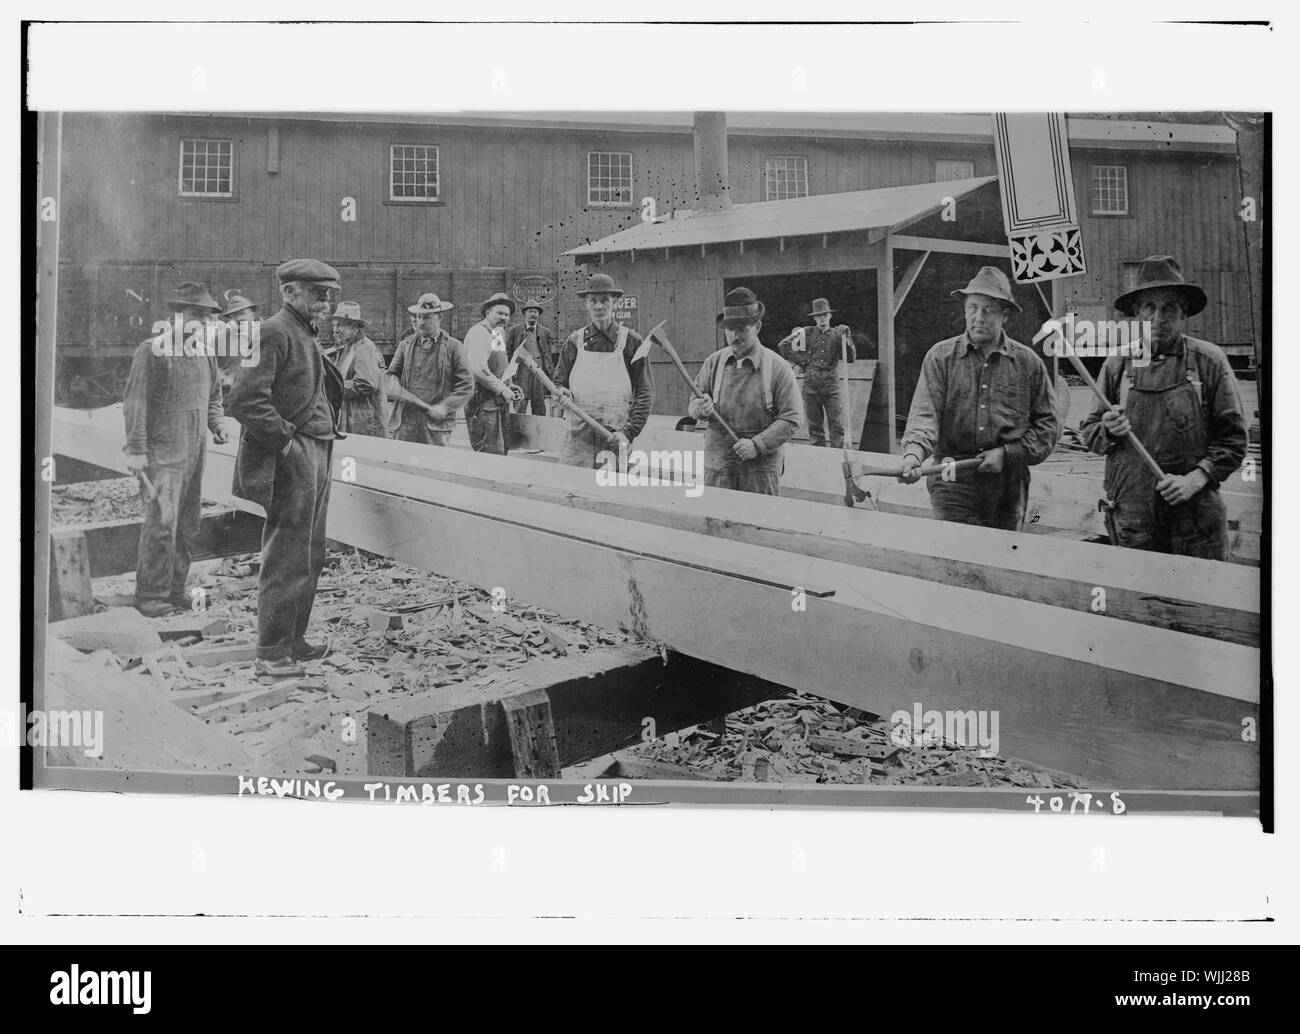 Hewing timbers for ship Stock Photo